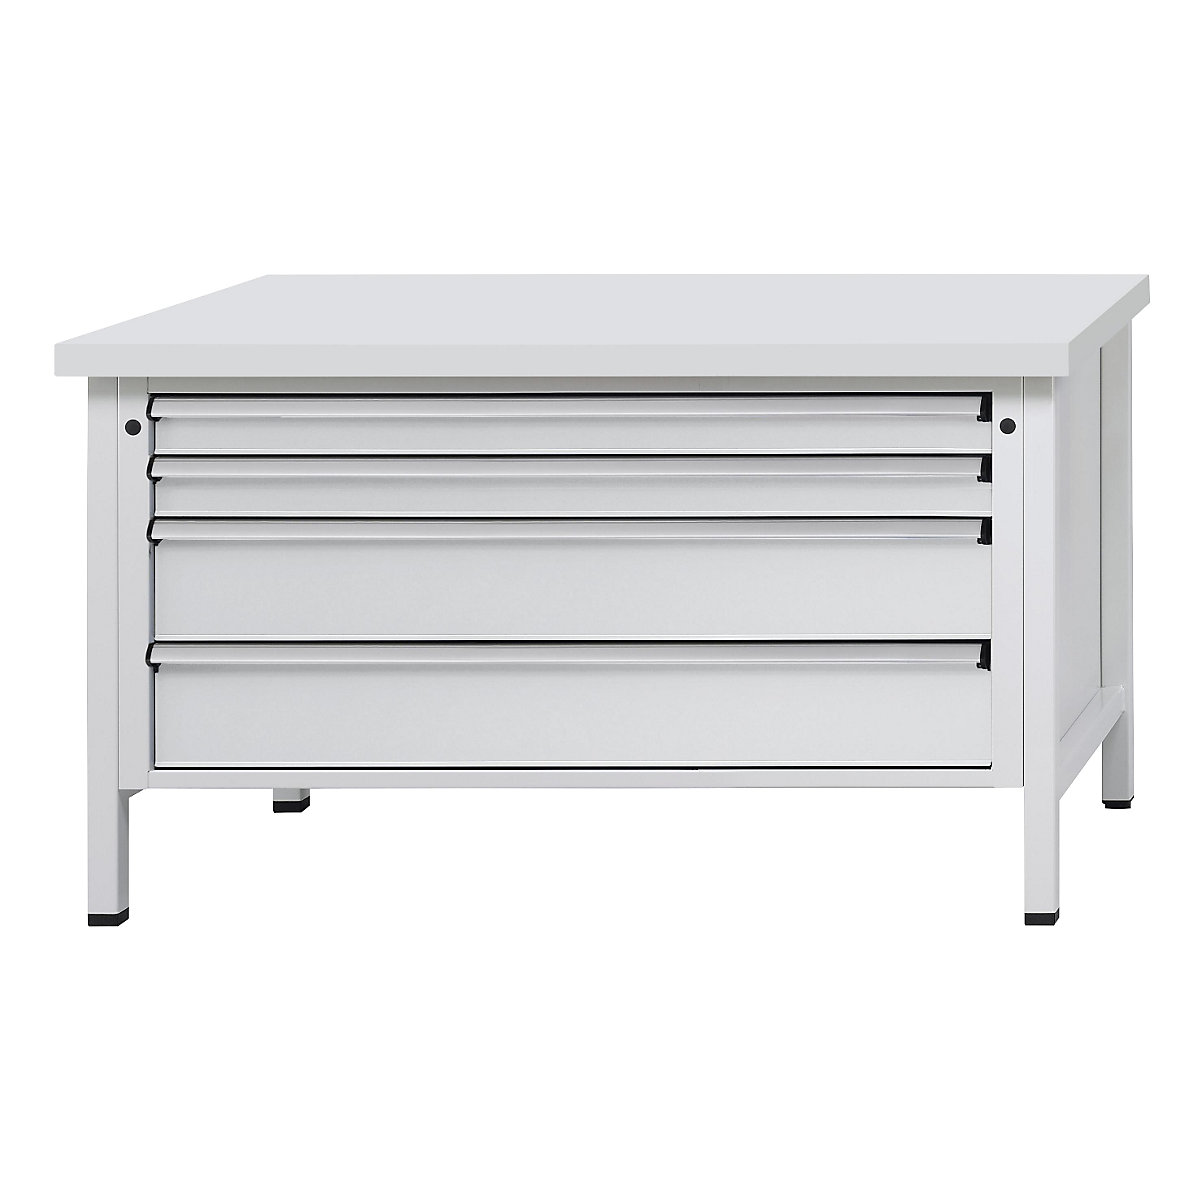 Workbench with XL/XXL drawers, frame construction – ANKE, width 1500 mm, 4 drawers, universal worktop, front in light grey-13